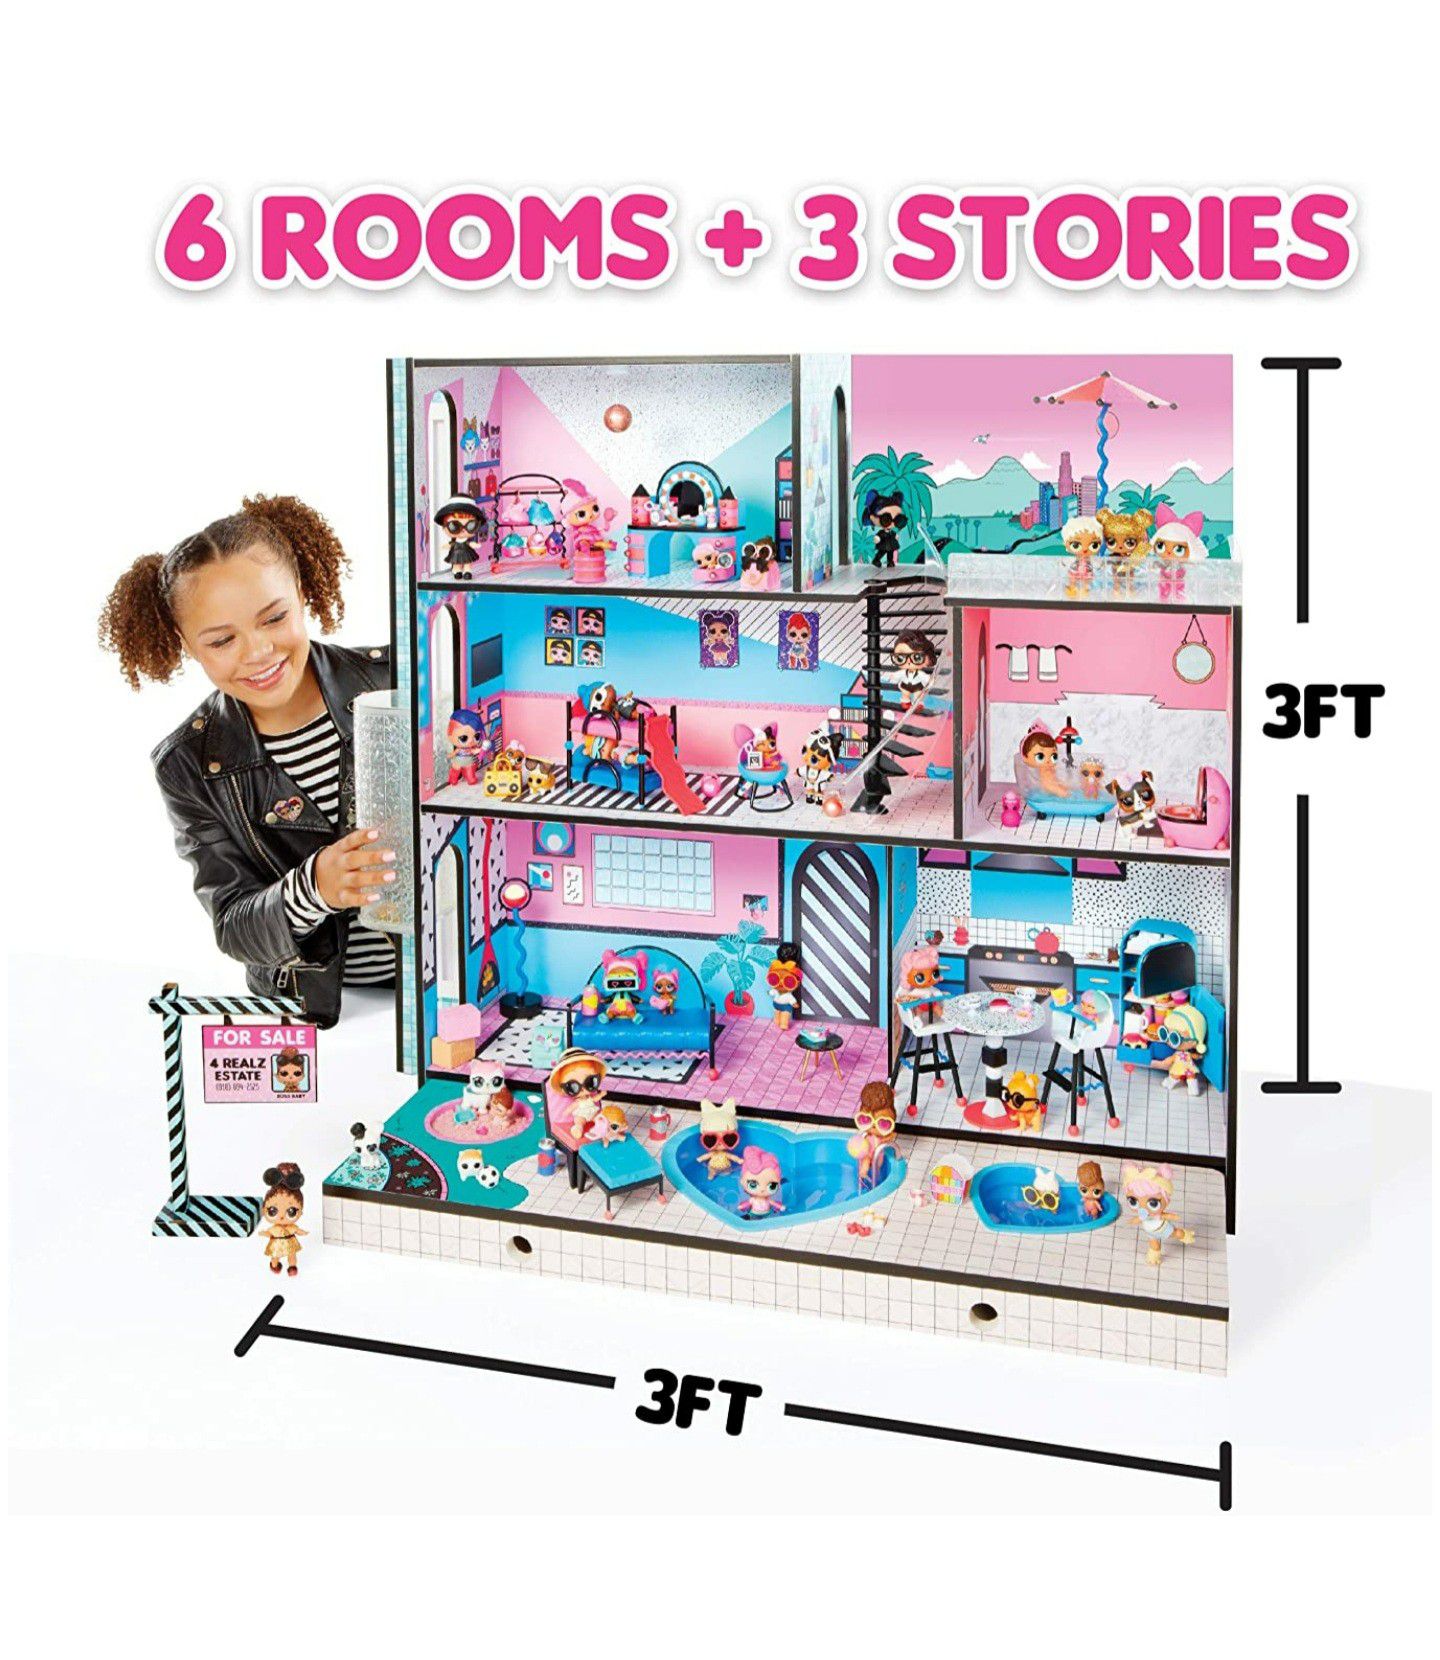 NEW LOL DOLL HOUSE WITH LIGHTS AND SOUNDS